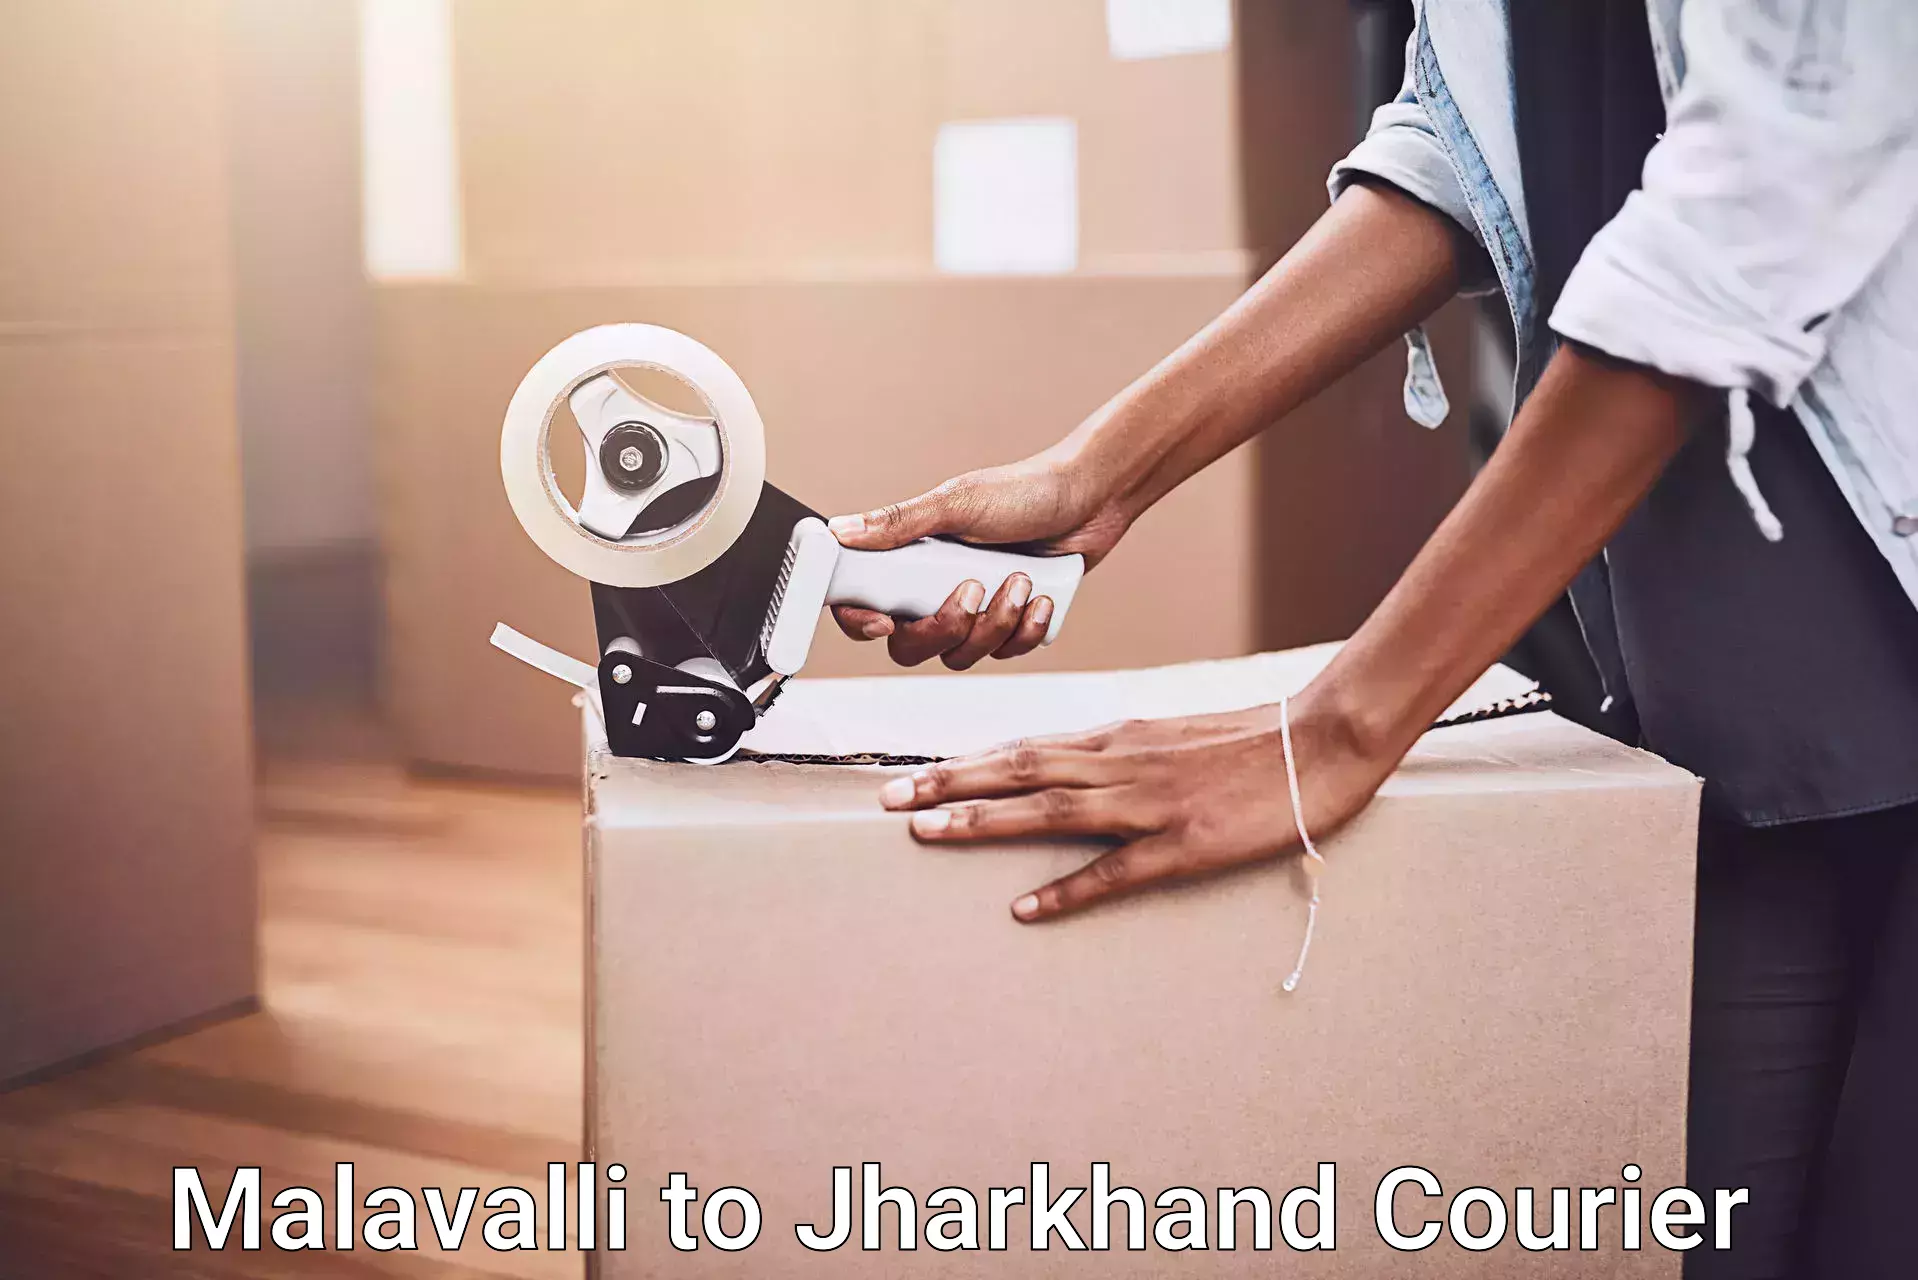 Specialized moving company in Malavalli to Isri